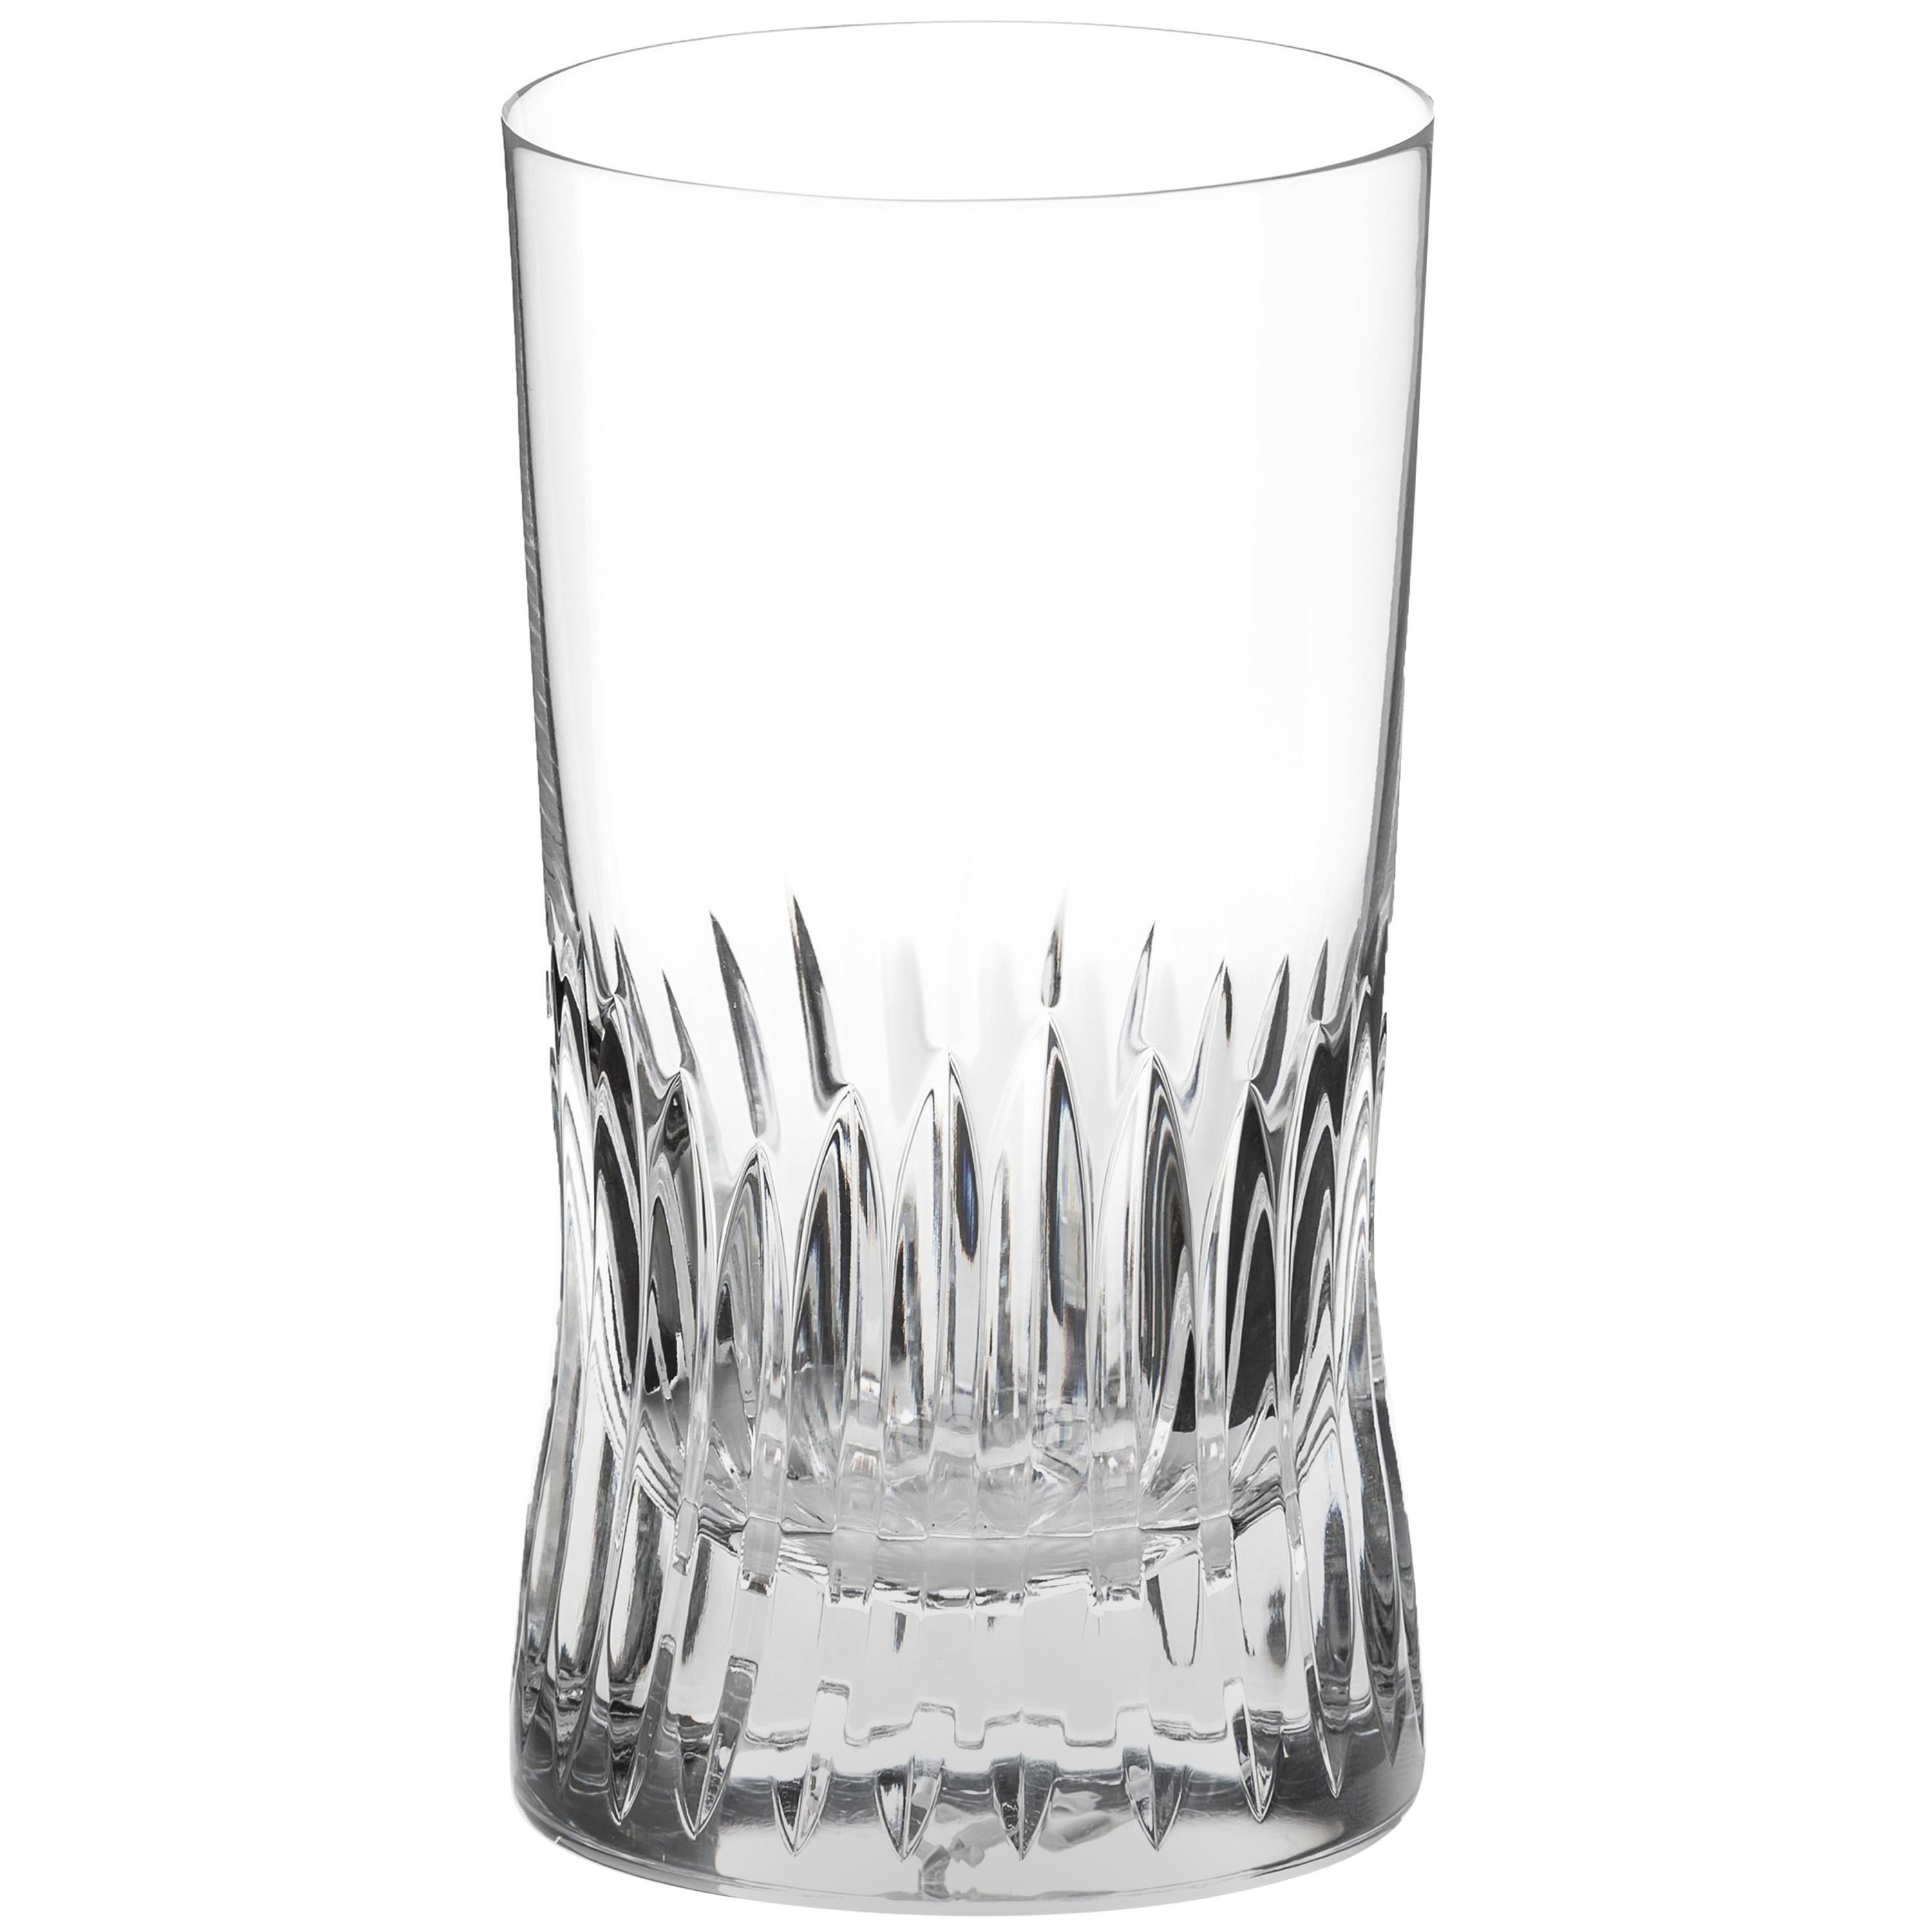 A large tumbler glass made by hand
Glass designed by Martino Gamper for J. HILL’s Standard as part of our 'CUTTINGS' collection.

The Collection: Cuttings
Cuttings is a contemporary, award-winning collection of handmade crystal glasses in six